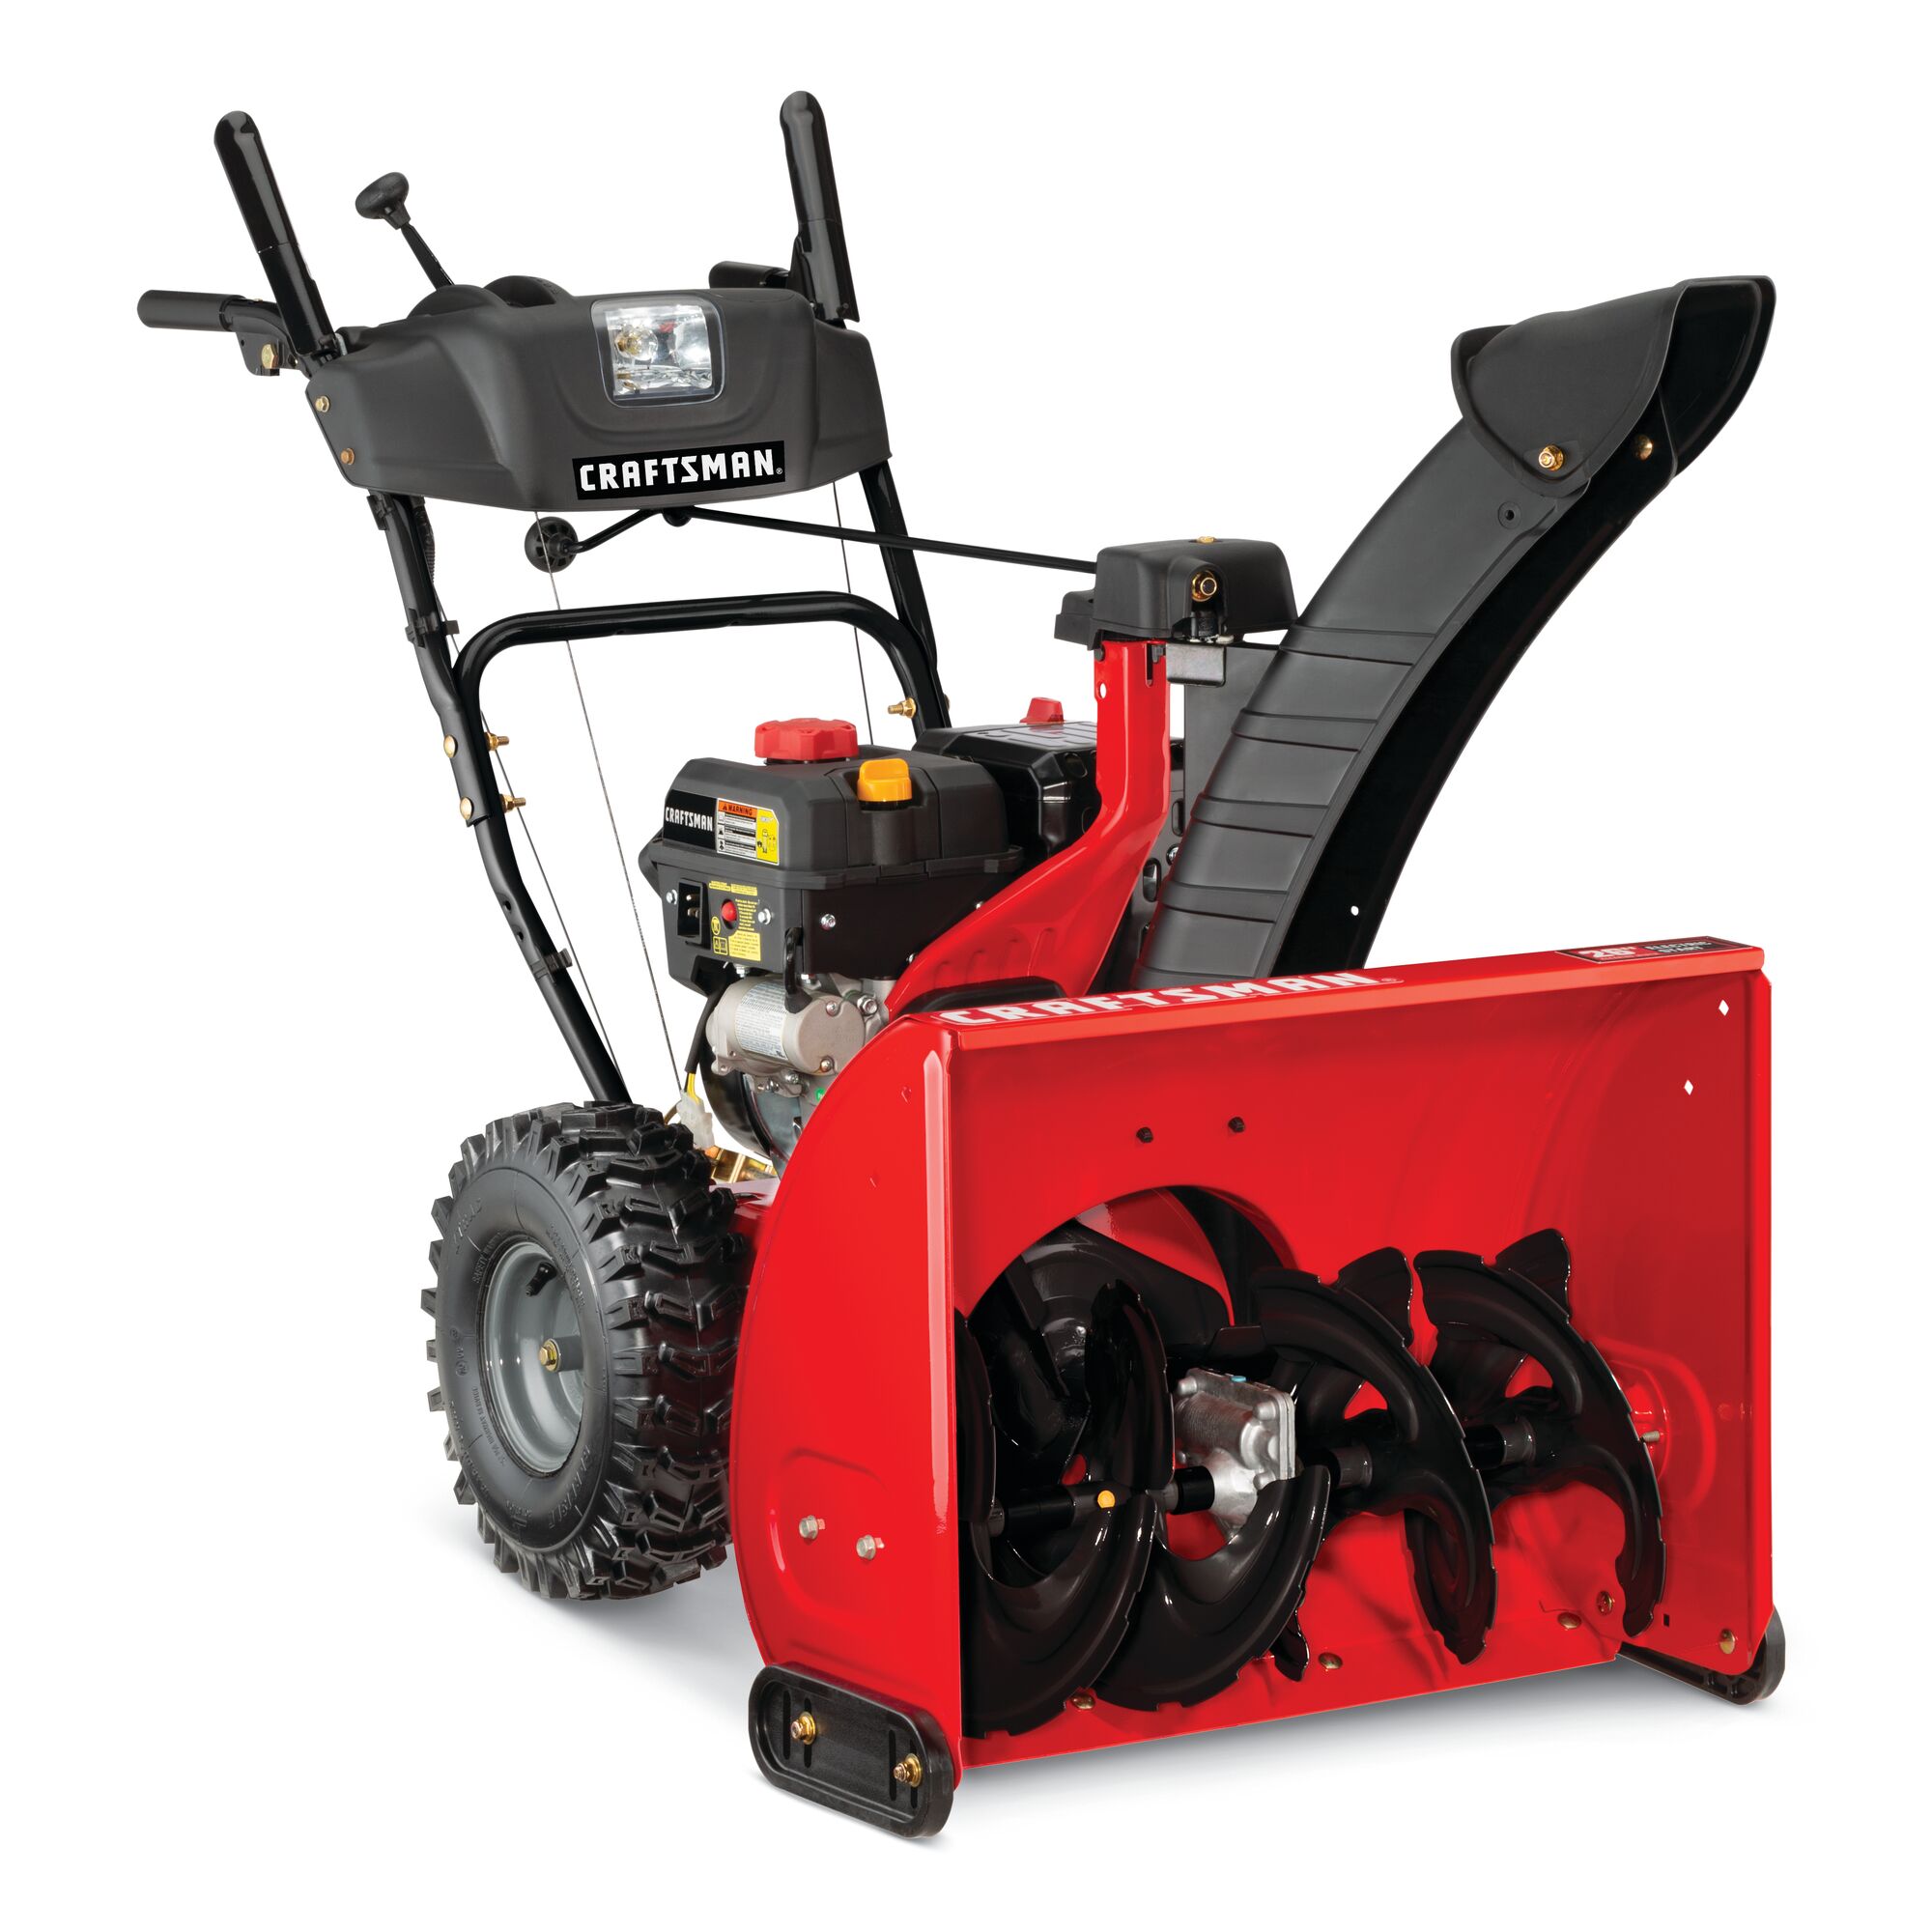 Profile of 26 inch 208 CC electric start two stage snow blower.